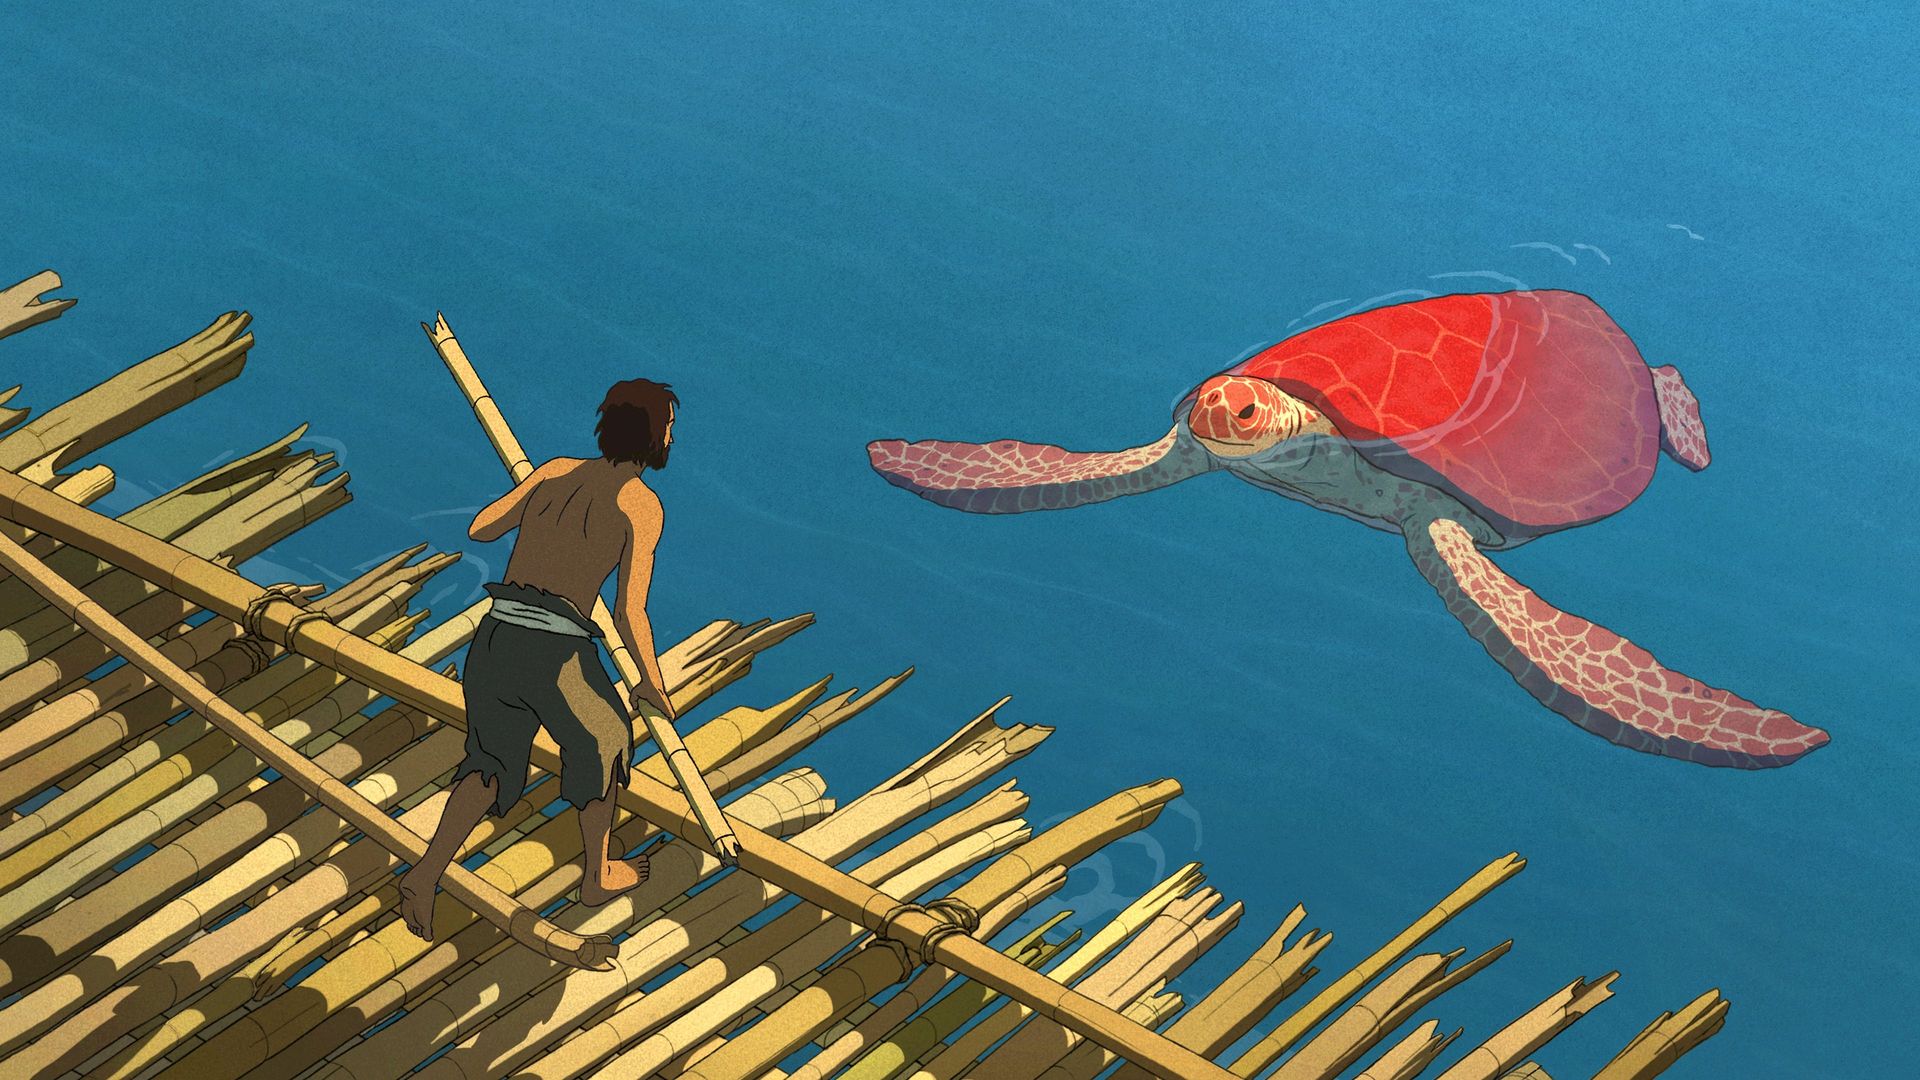 The Red Turtle Backdrop